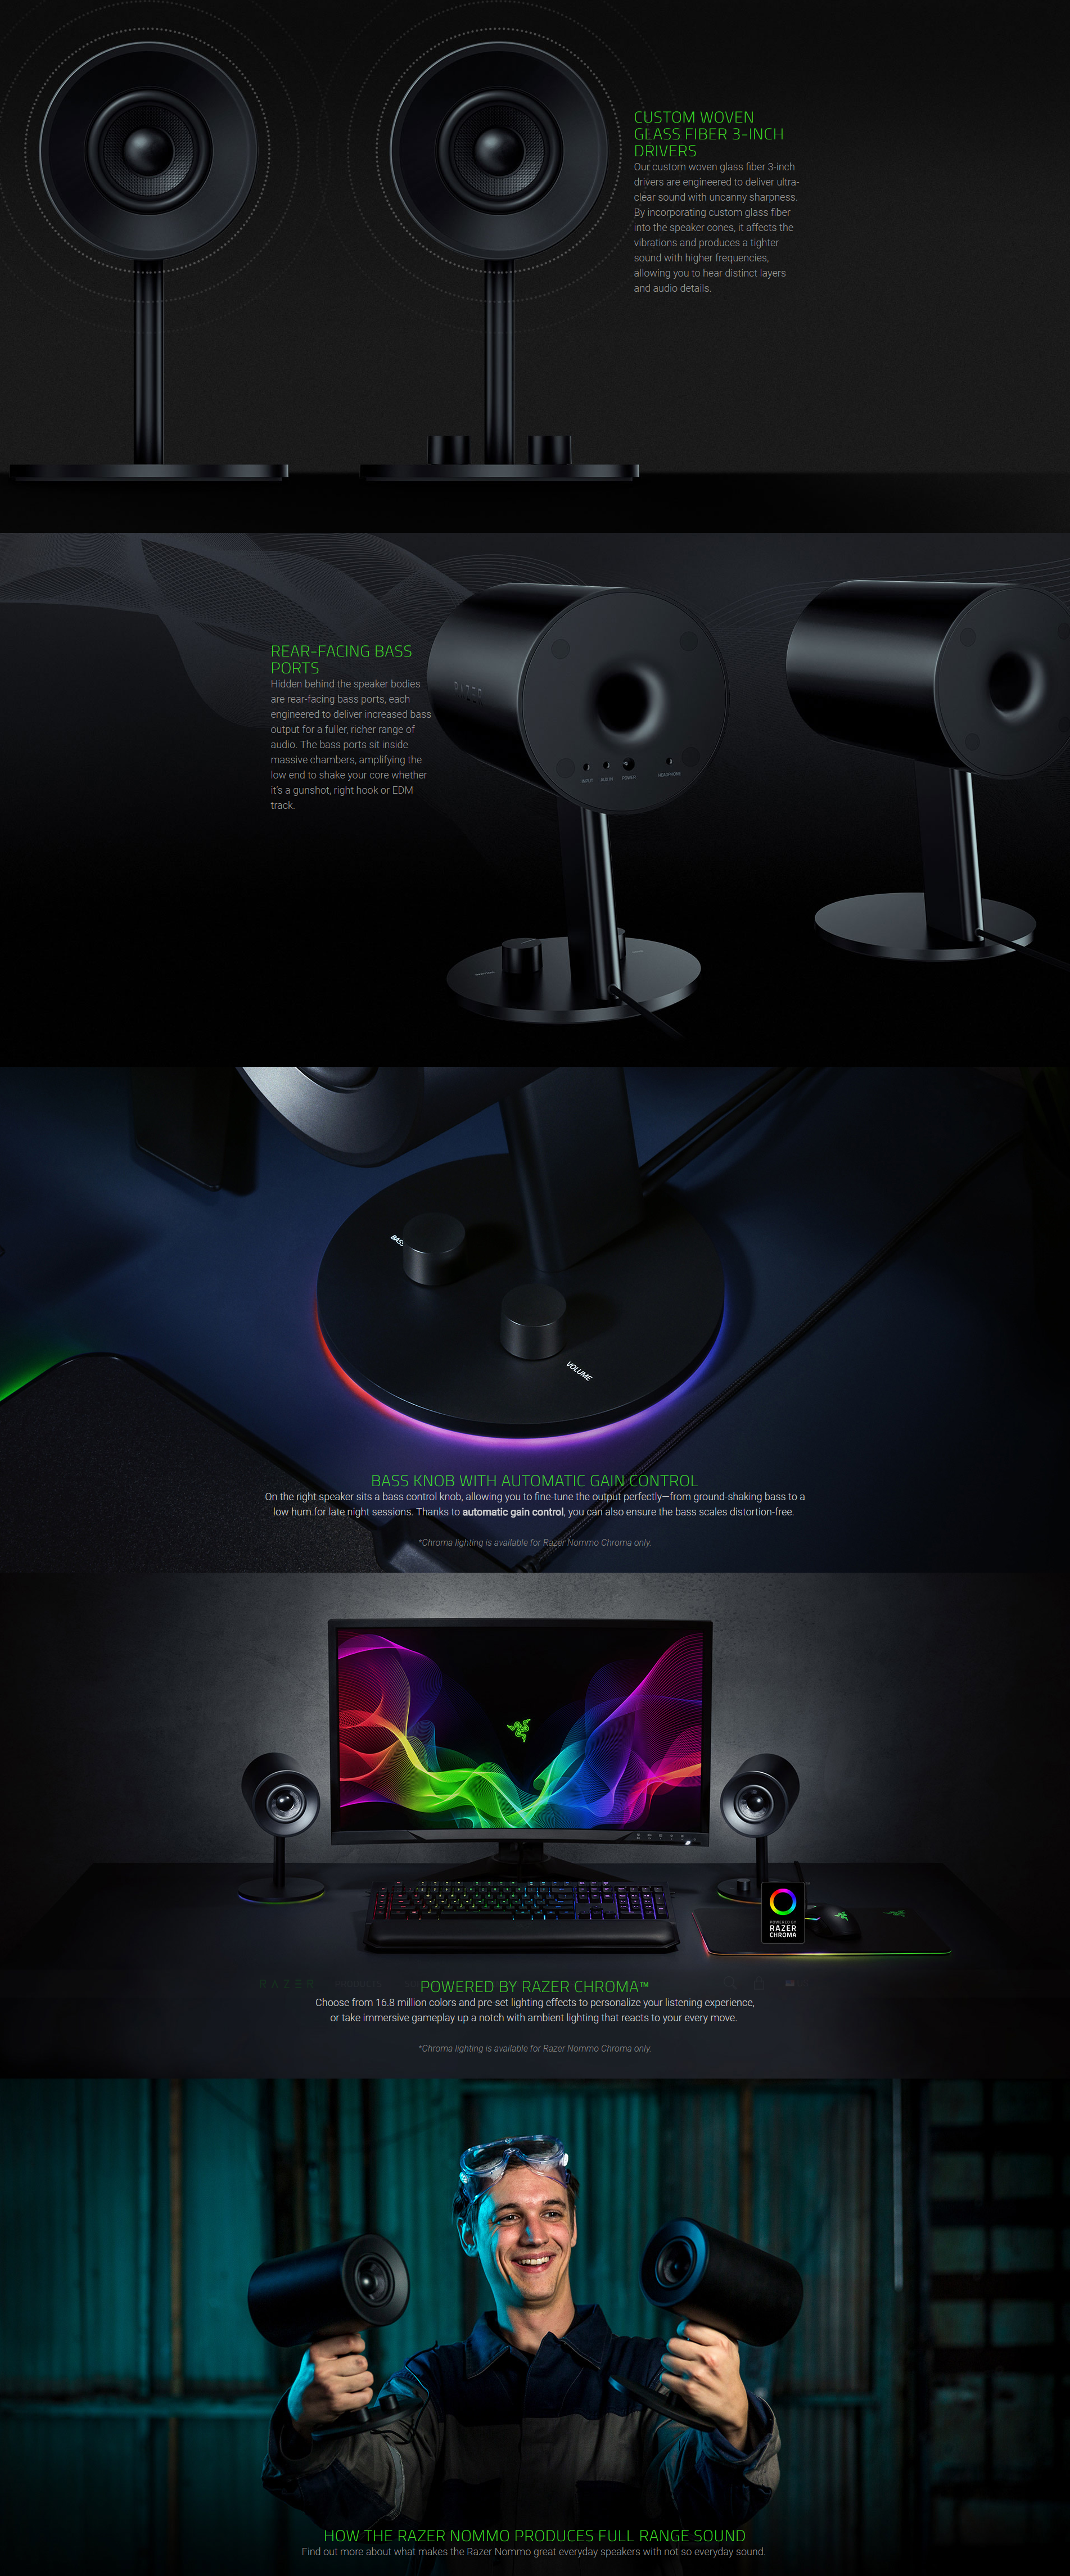 A large marketing image providing additional information about the product Razer Nommo Chroma Stereo Gaming Speakers - Additional alt info not provided